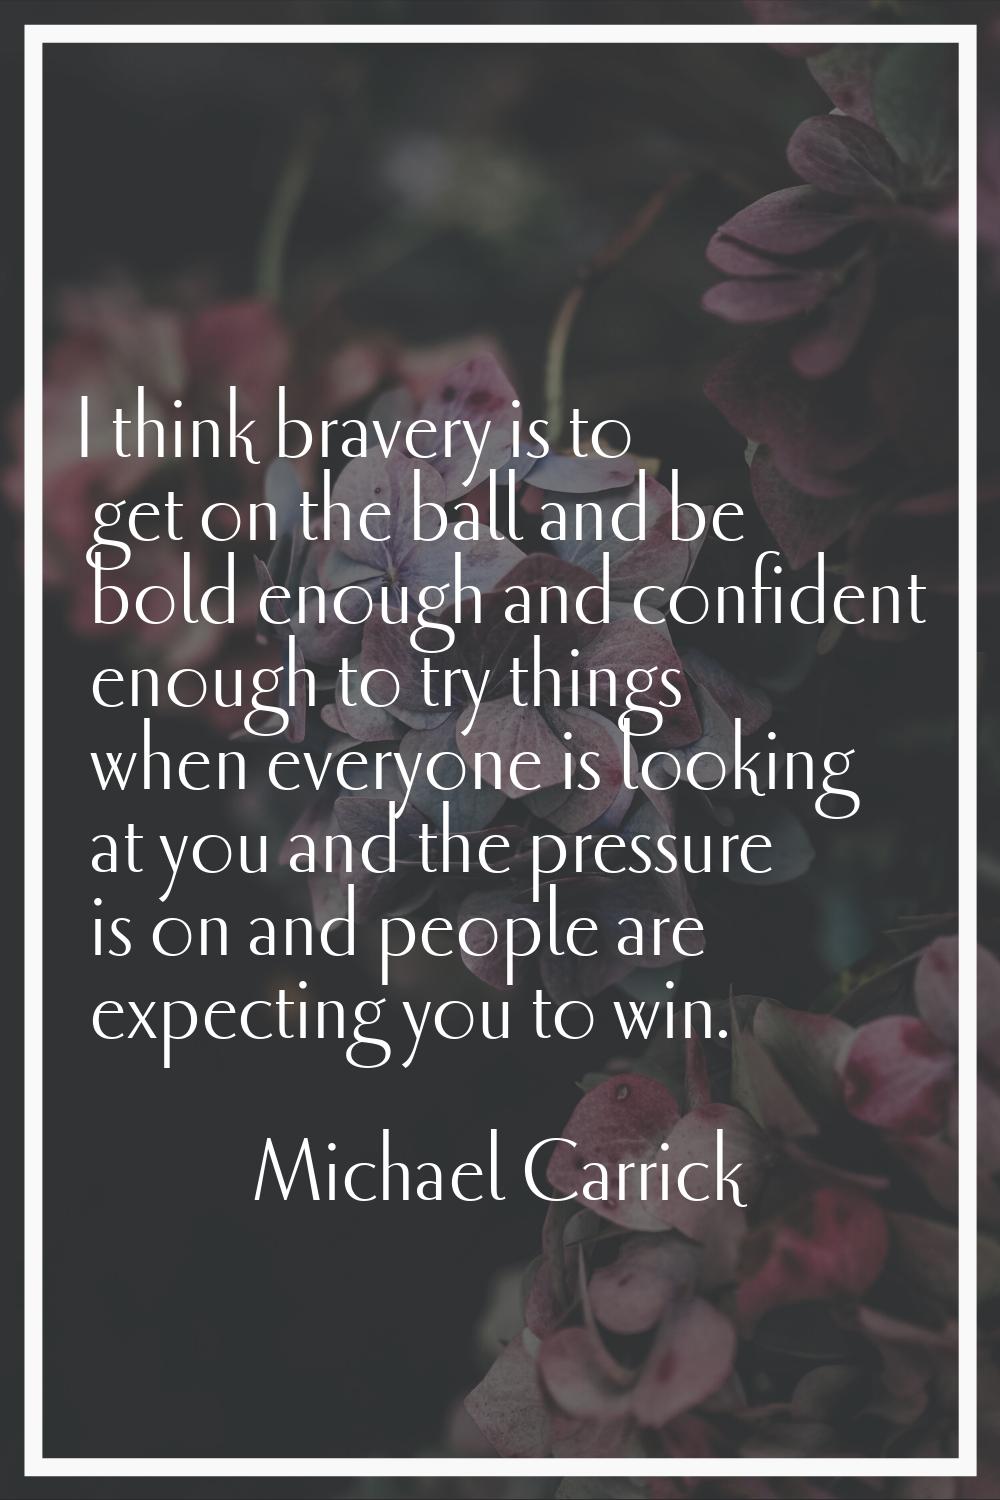 I think bravery is to get on the ball and be bold enough and confident enough to try things when ev